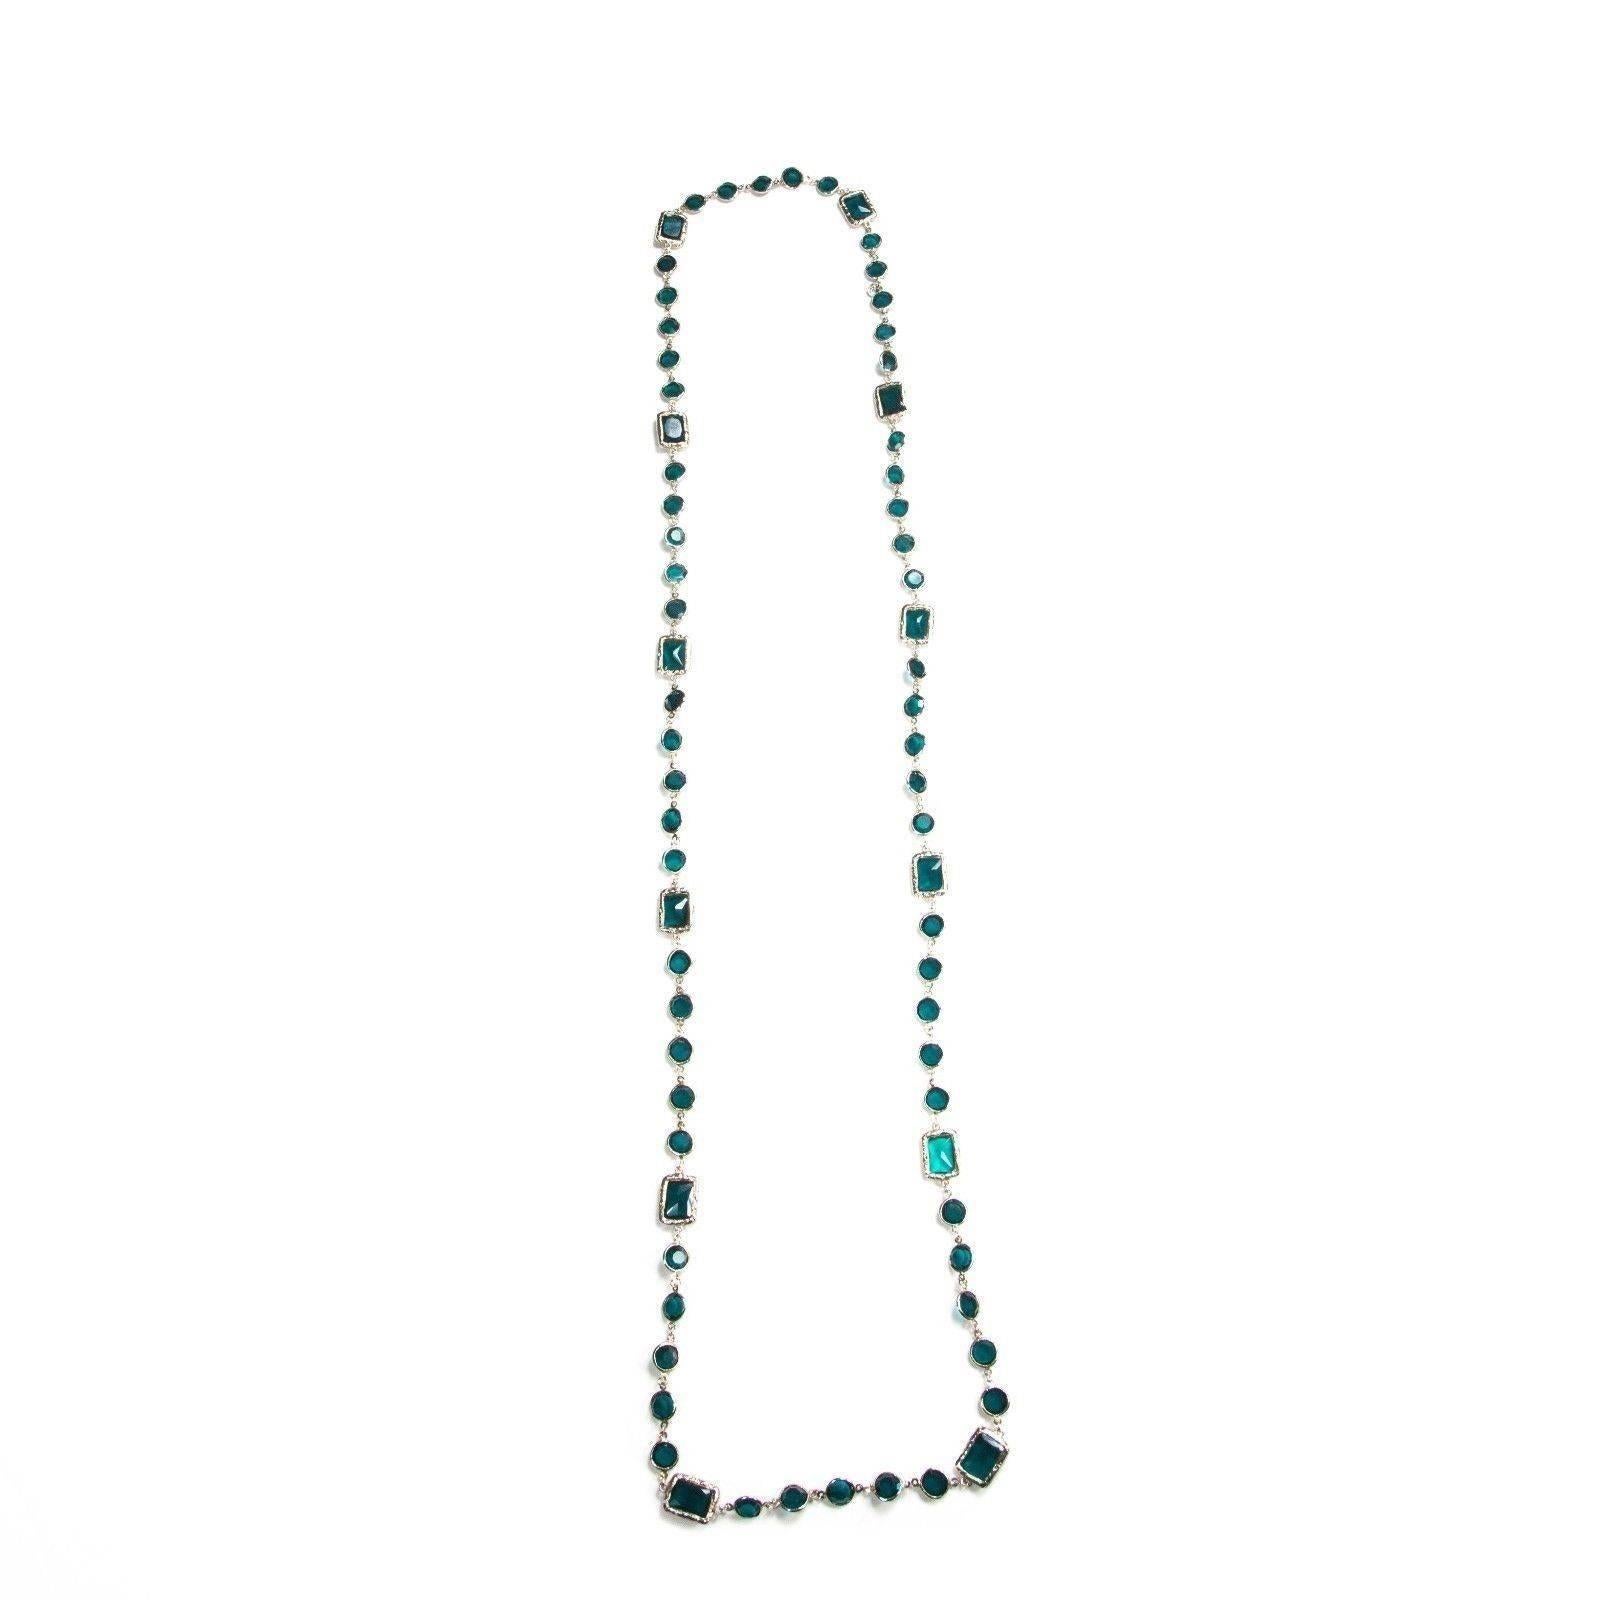 Chanel - Vintage Chicklet Gripoix Necklace

Color: Green Teal / Gold

Material: Glass

------------------------------------------------------------

Details:

- gold tone hardware

- glass chicklet & round stations

- logo tag stamped 